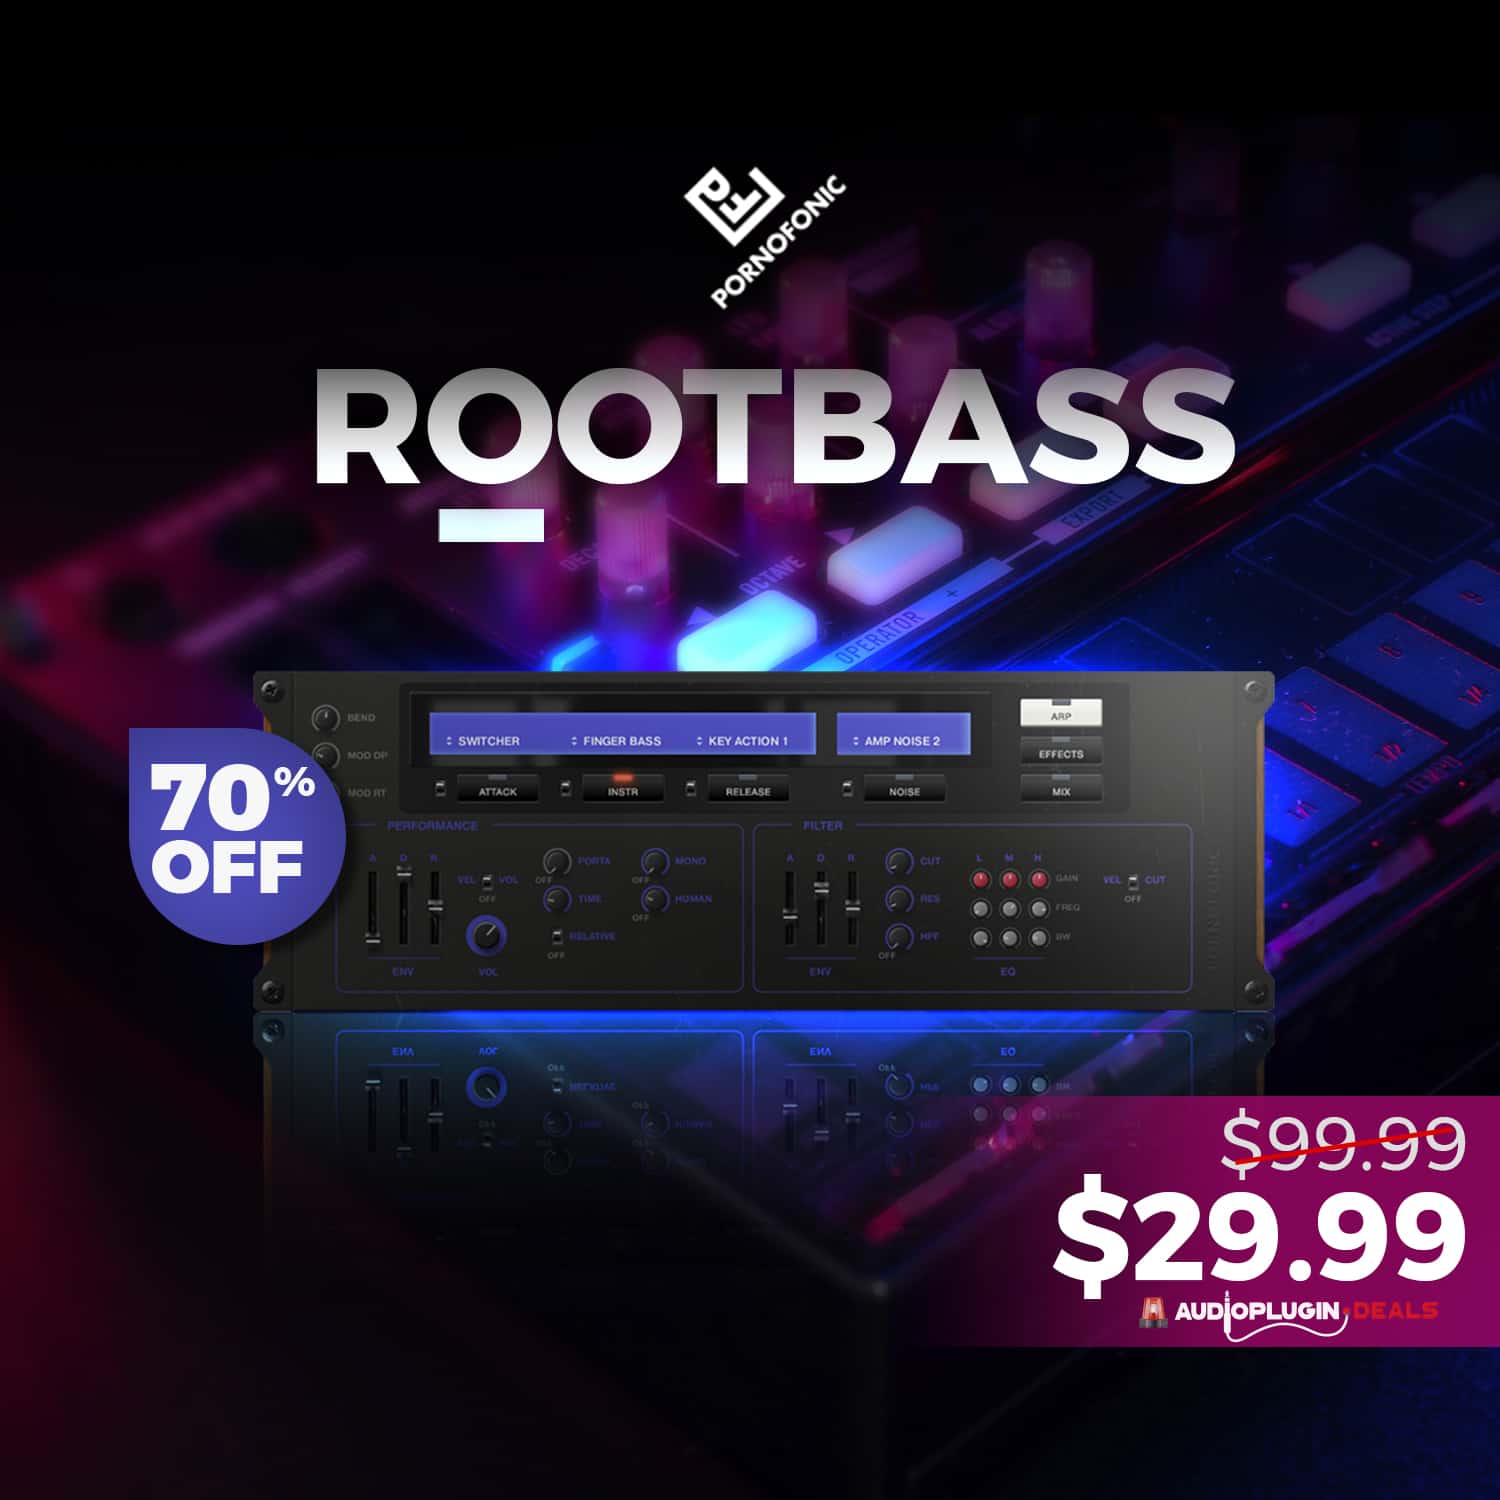 RootBass & RootBass TANG by Pornofonic – 70% Off Sale